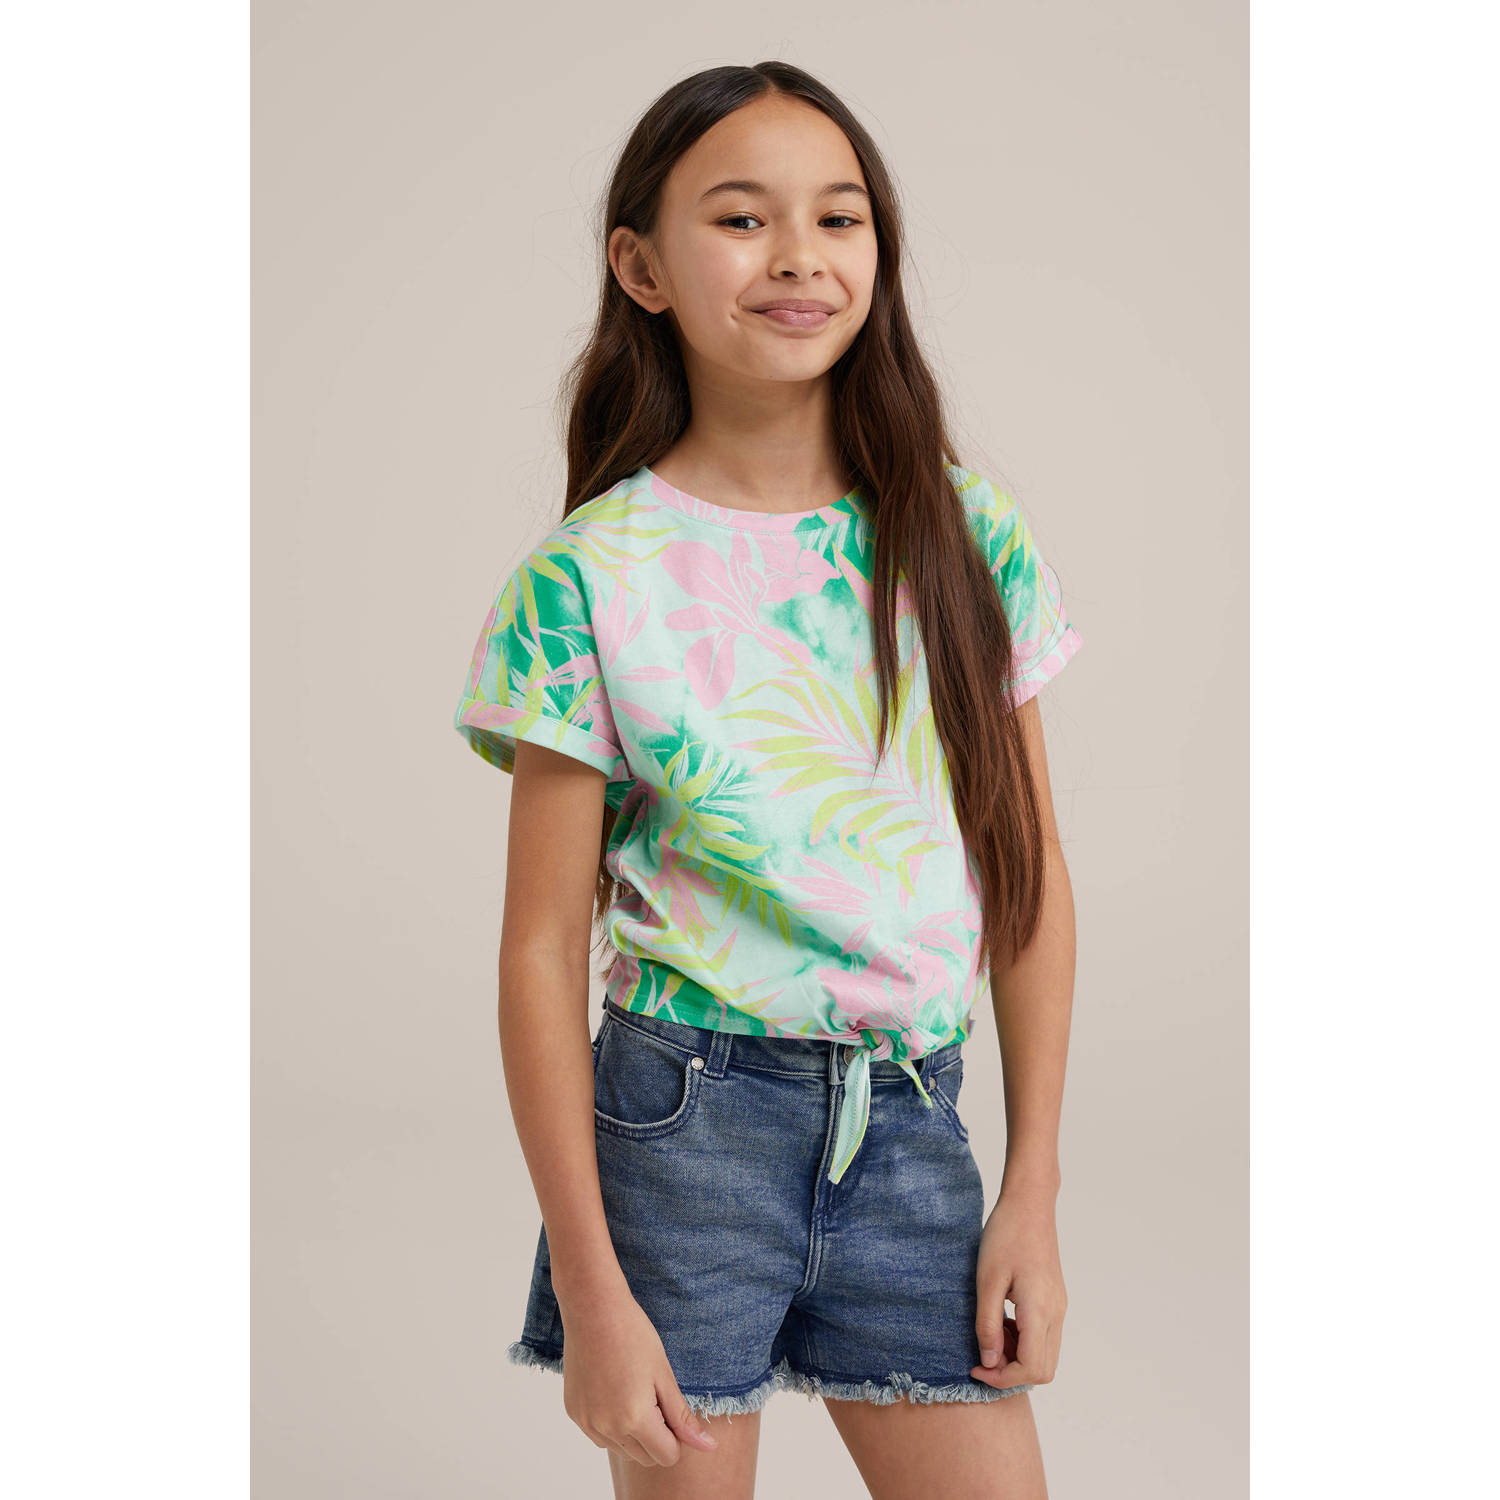 WE Fashion T-shirt met all over print wit groen roze